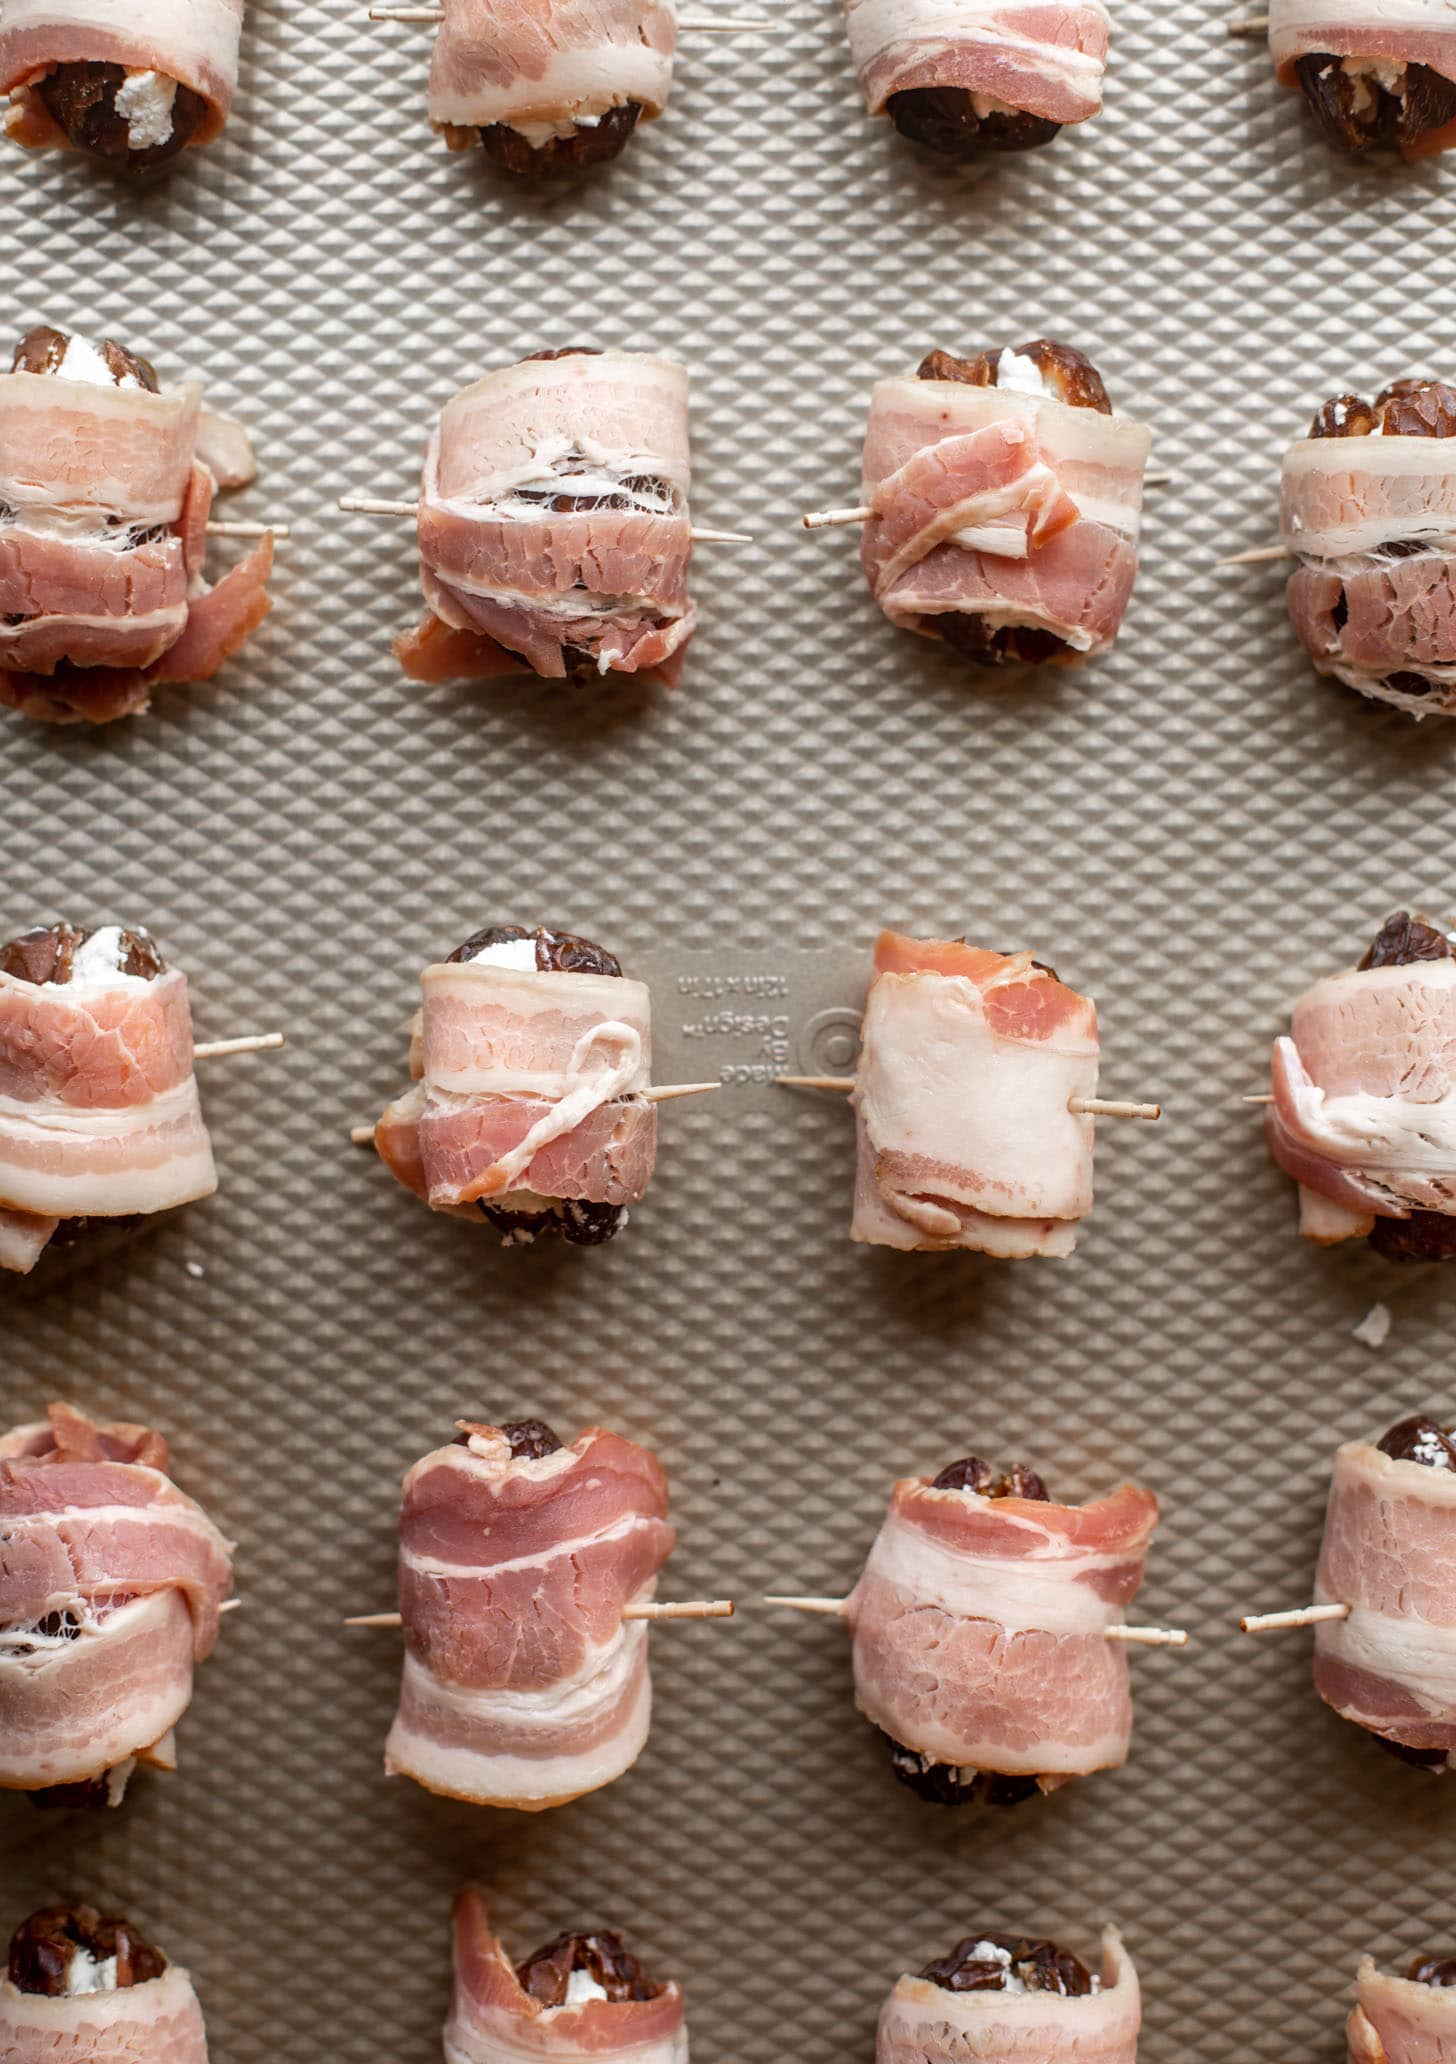  bacon wrapped goat cheese stuffed dates ready for the oven